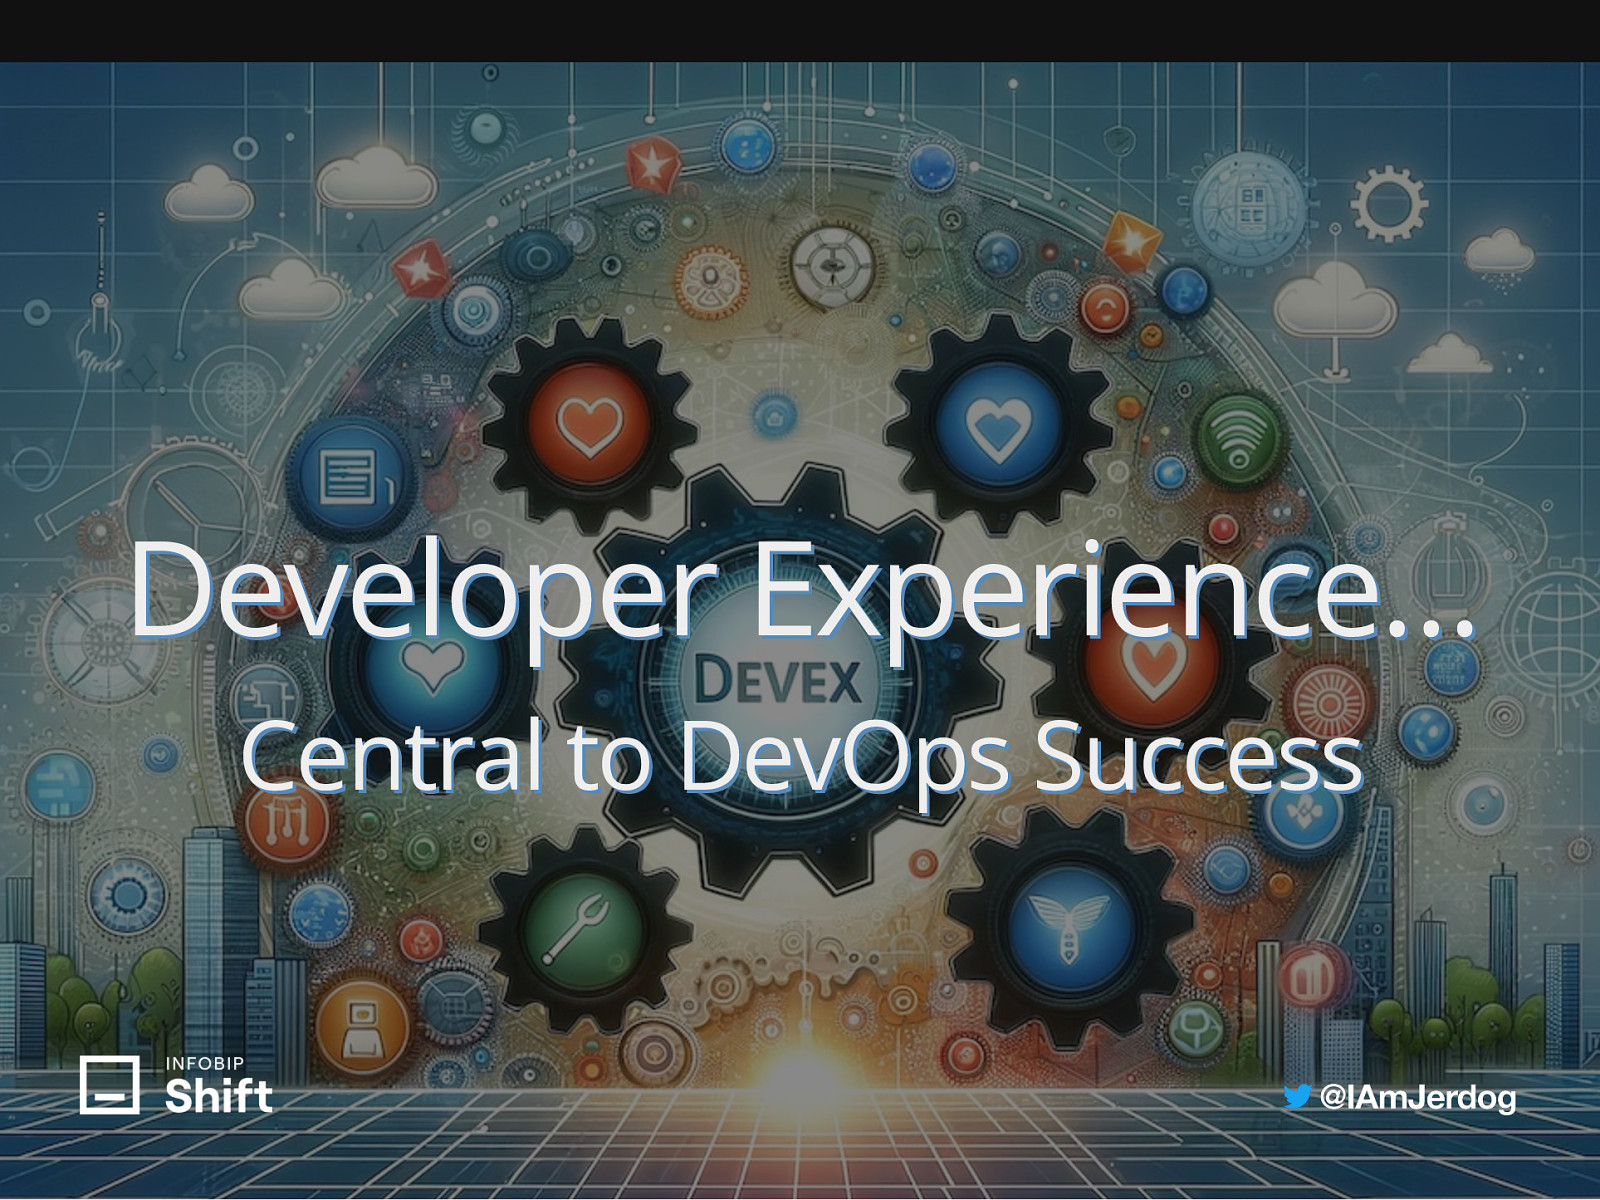 Developer Experience is central to DevOps success by Jeremy Meiss